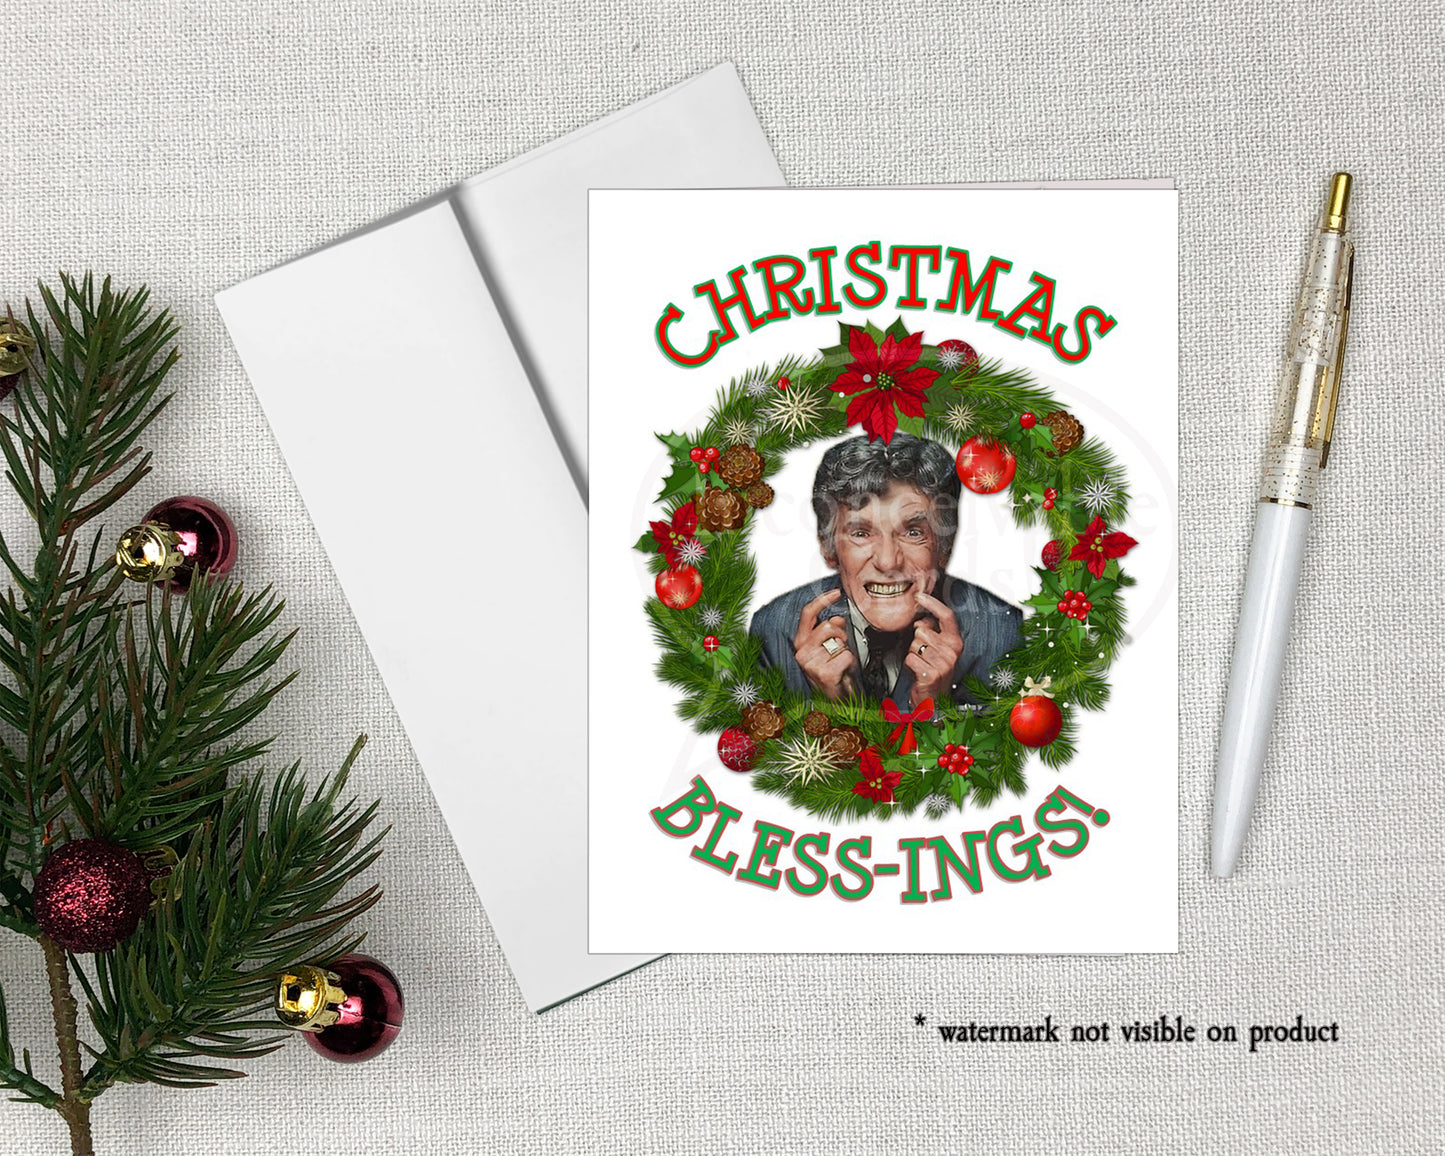 Copy of Christmas Vacay "BLESSINGS!" Christmas Card